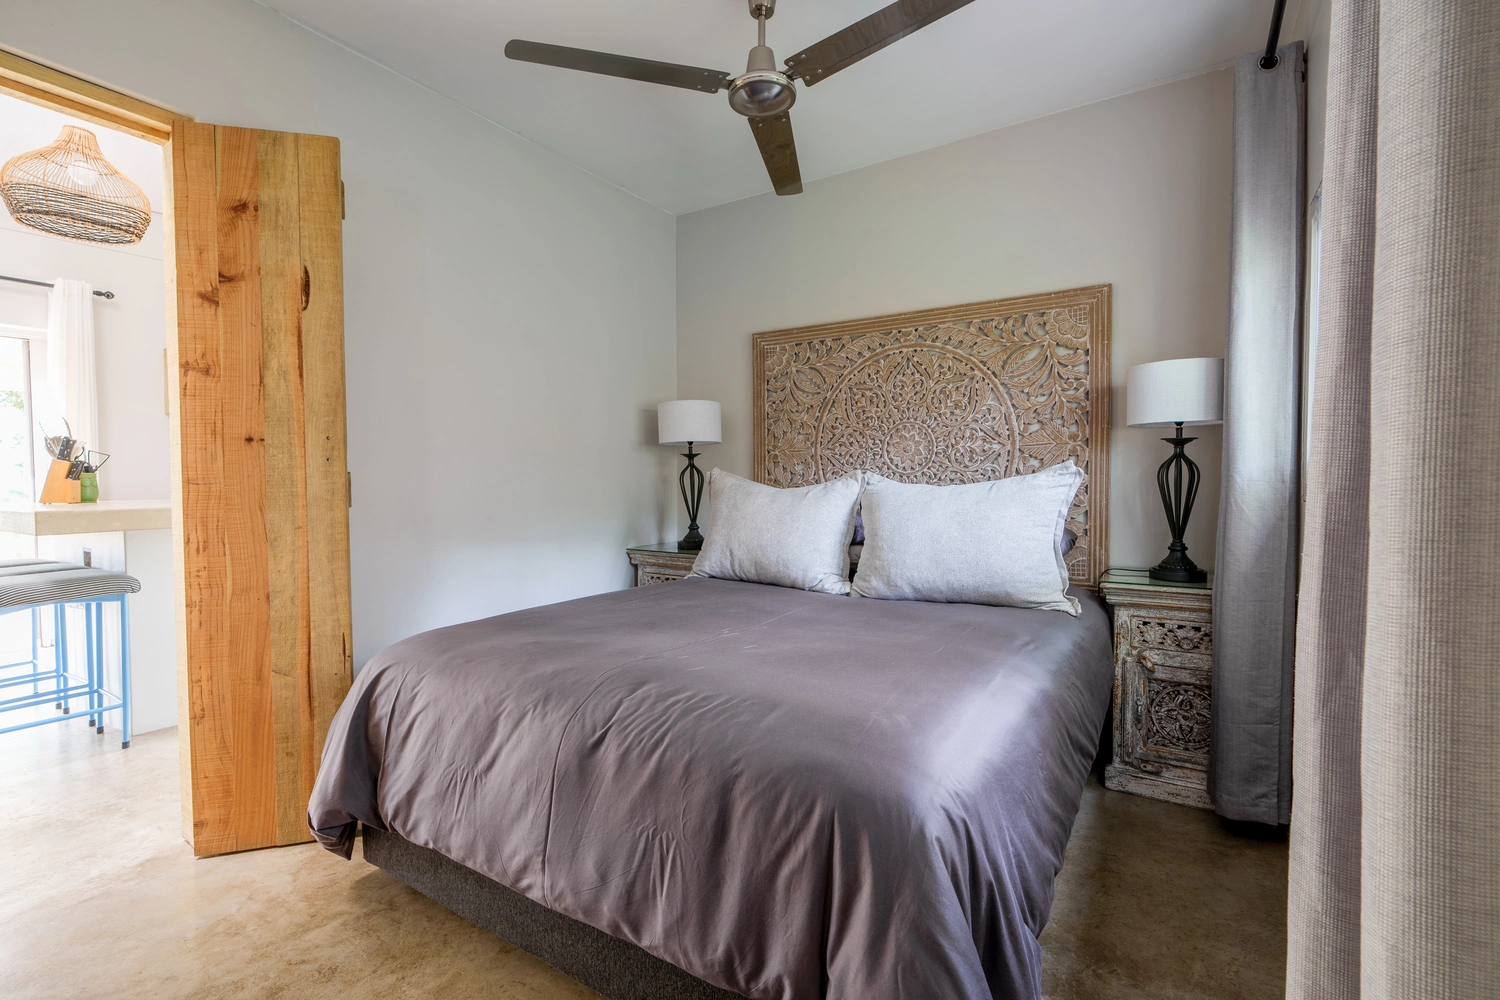 Main bedroom with queen bed and ceiling fan.